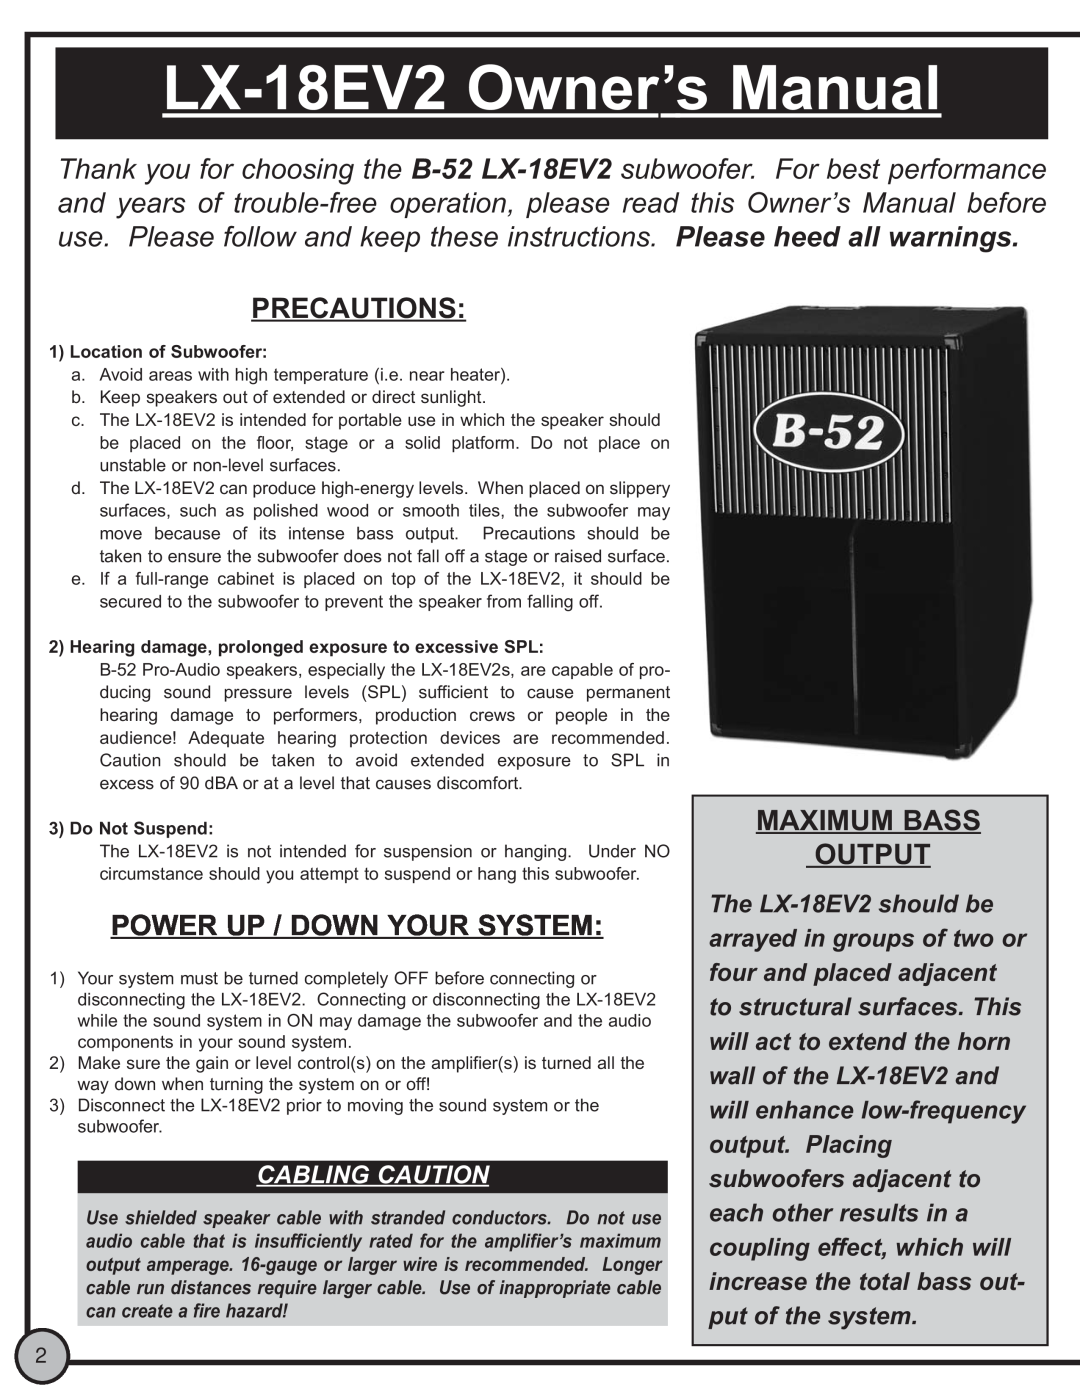 ETI Sound Systems, INC LX-18EV2 Precautions, Power Up / Down Your System, Maximum Bass Output, Location of Subwoofer 